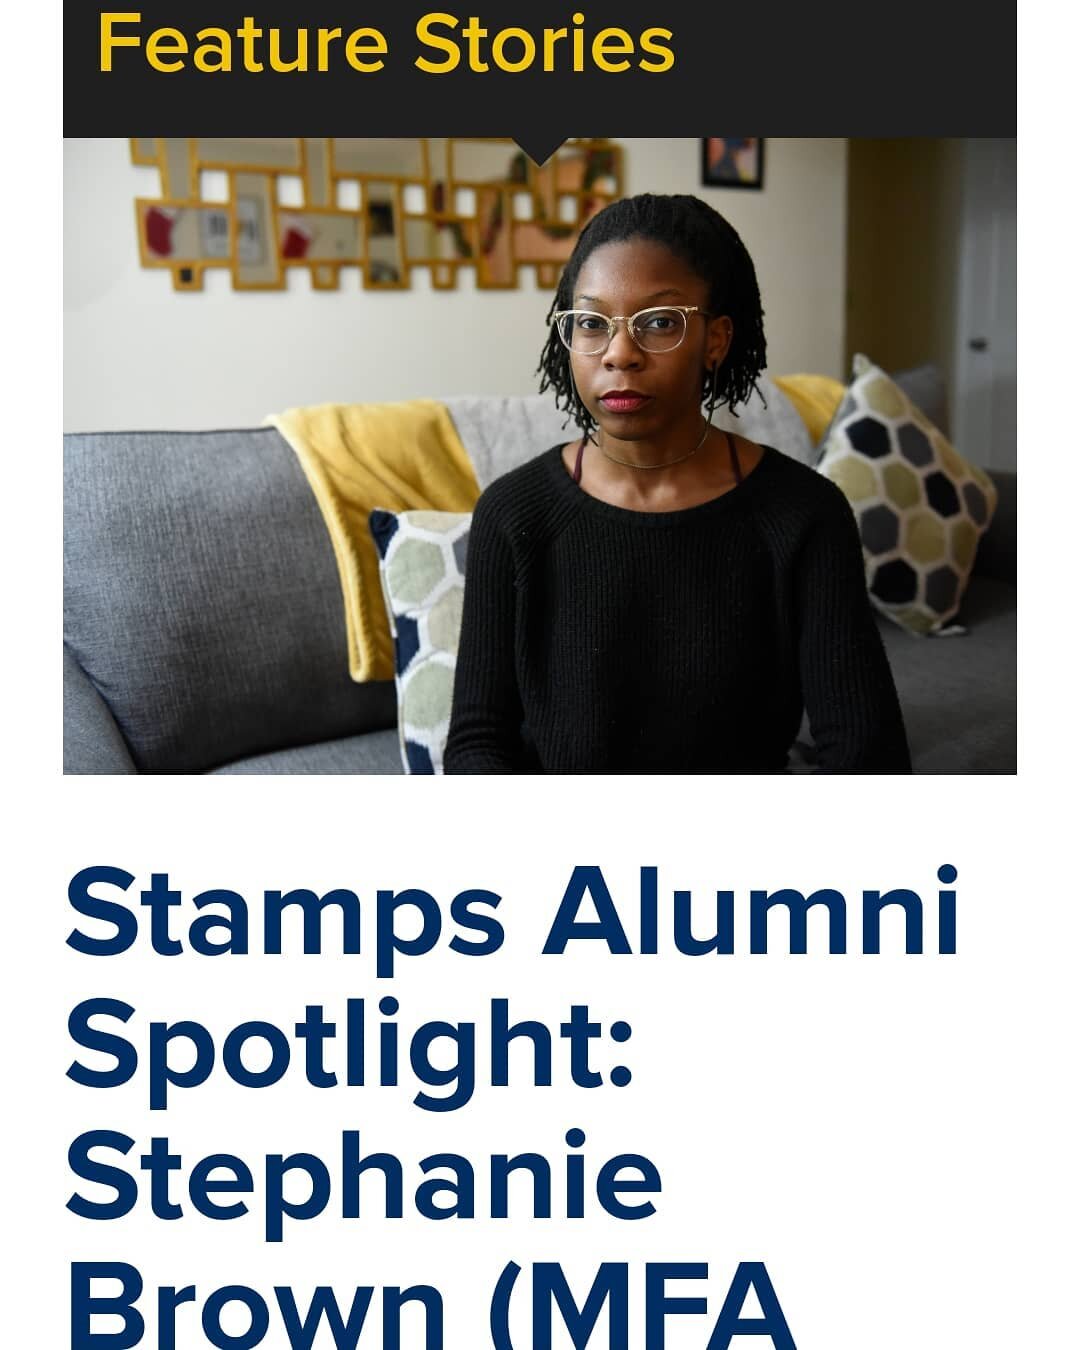 I've been getting things together and that includes updating the &quot;press&quot; section on my website: stephaniebphotos.com

This Q&amp;A article from @umstamps means a lot to me because when re-reading it and comparing it to where I am now to whe